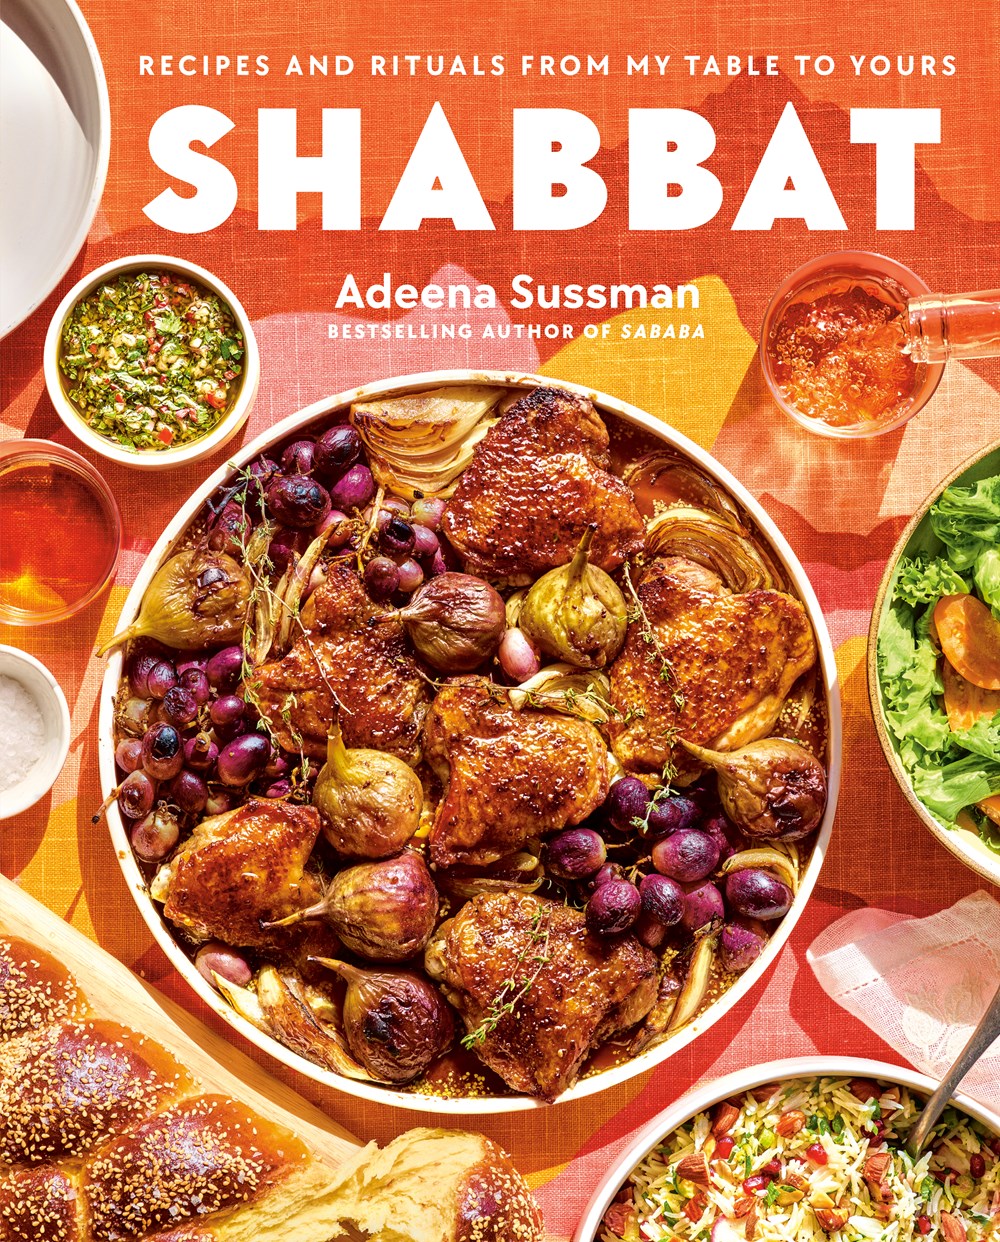 Shabbat: Recipes and Rituals from My Table to Yours by Adeena Sussman (9/5/23)